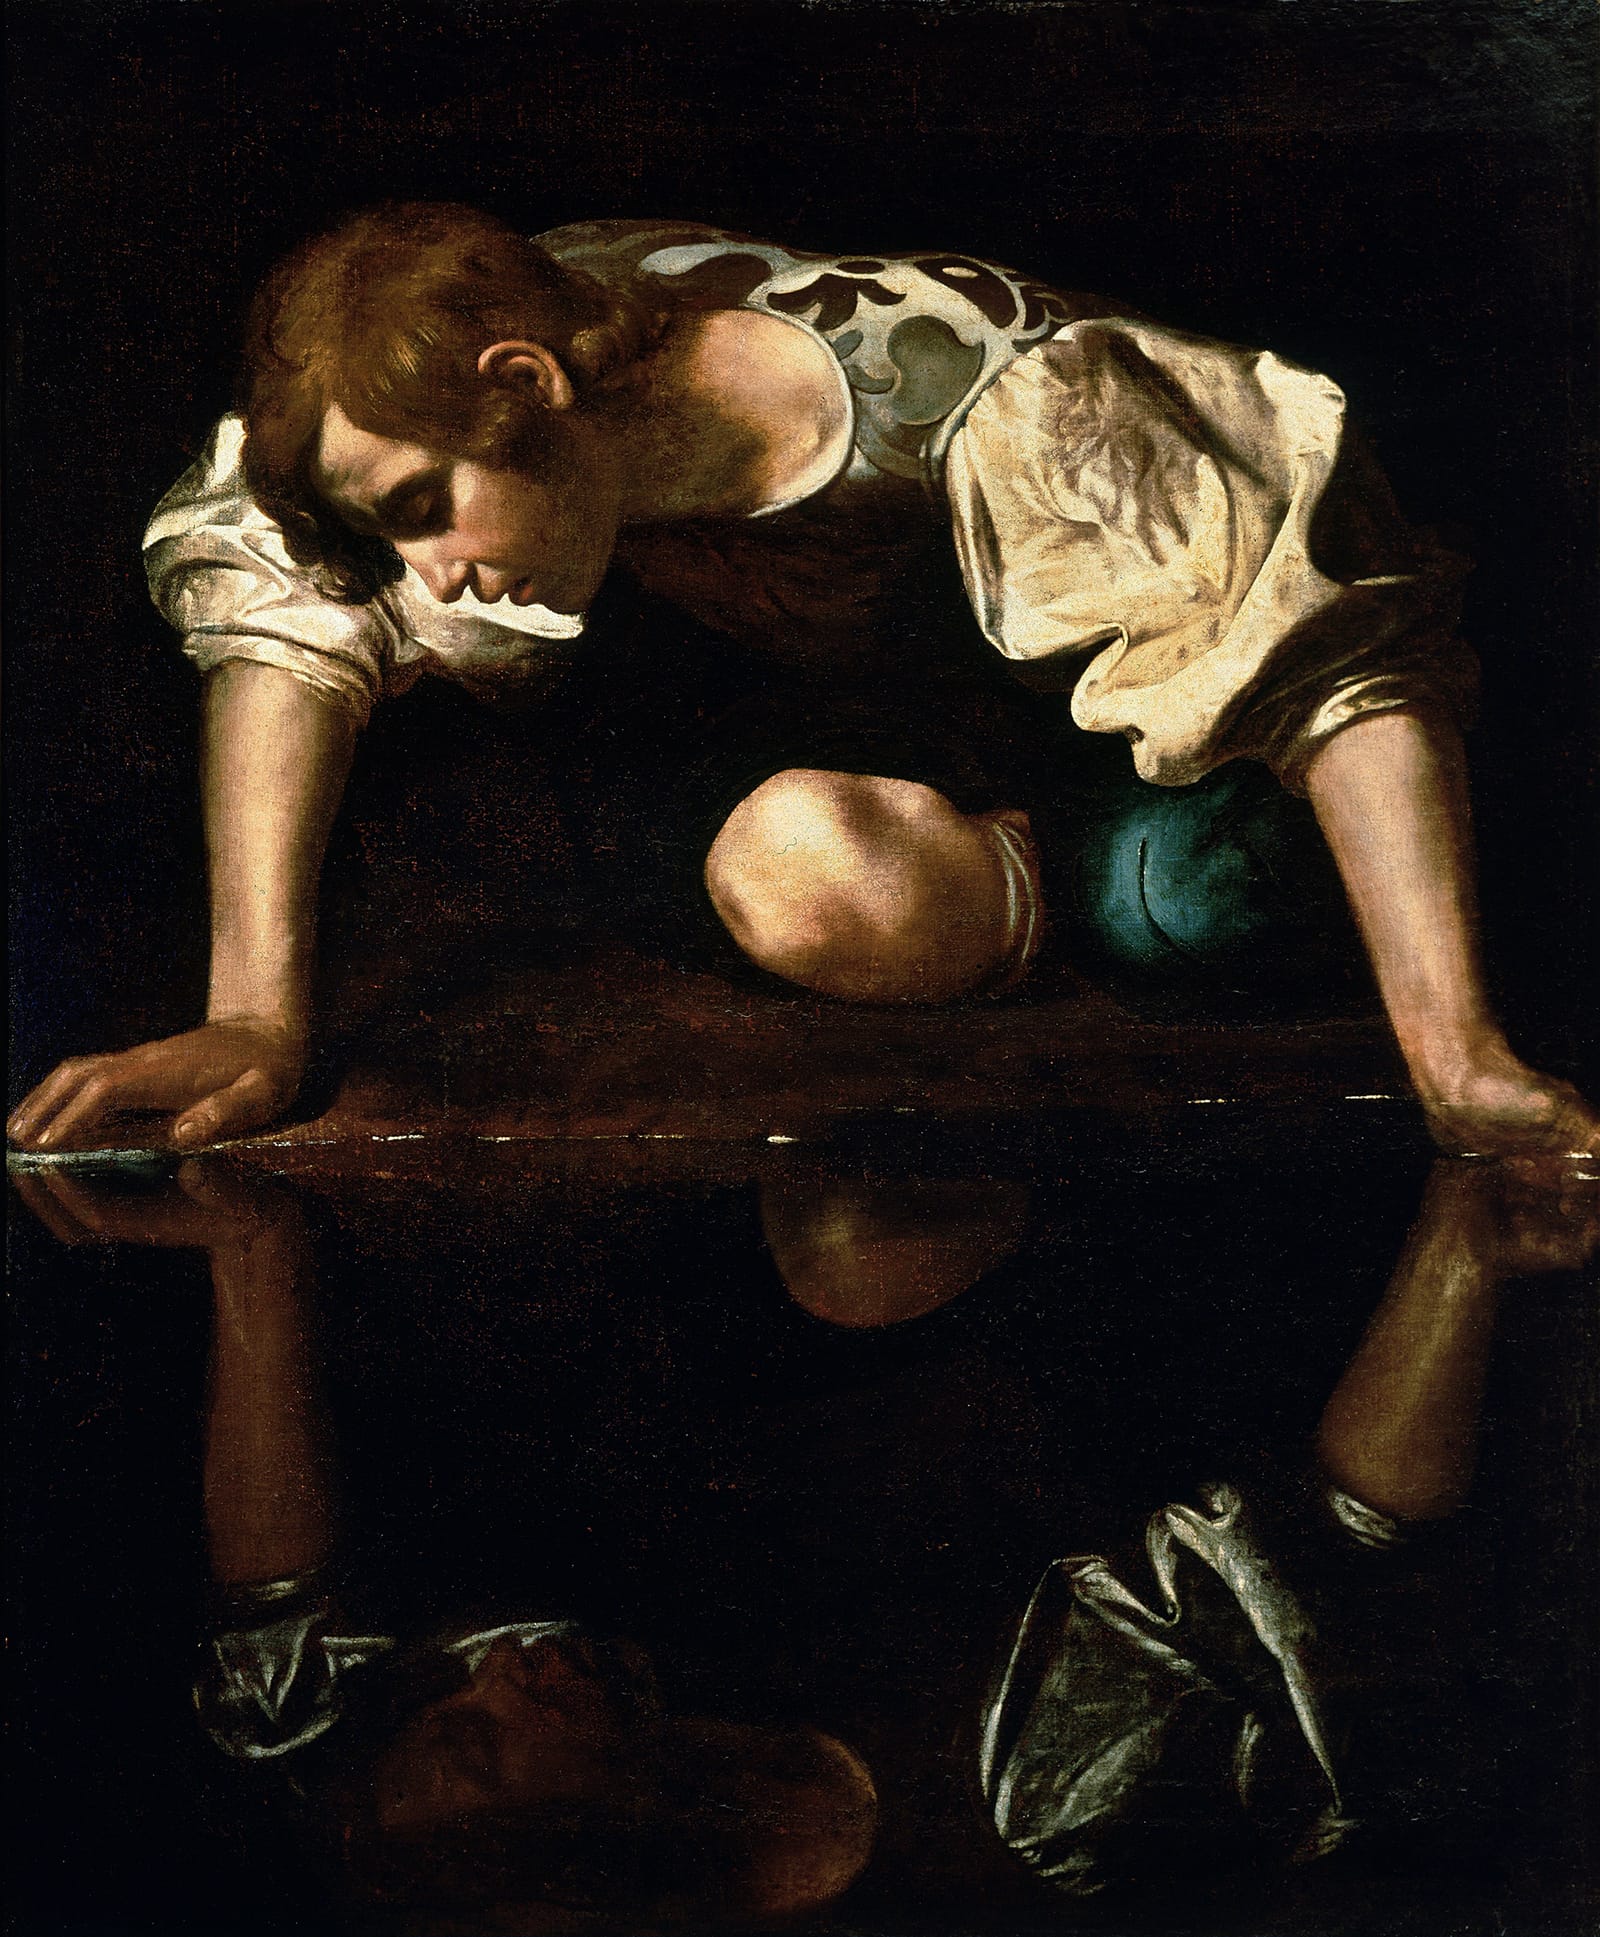 painting of narcissus by Caravaggio